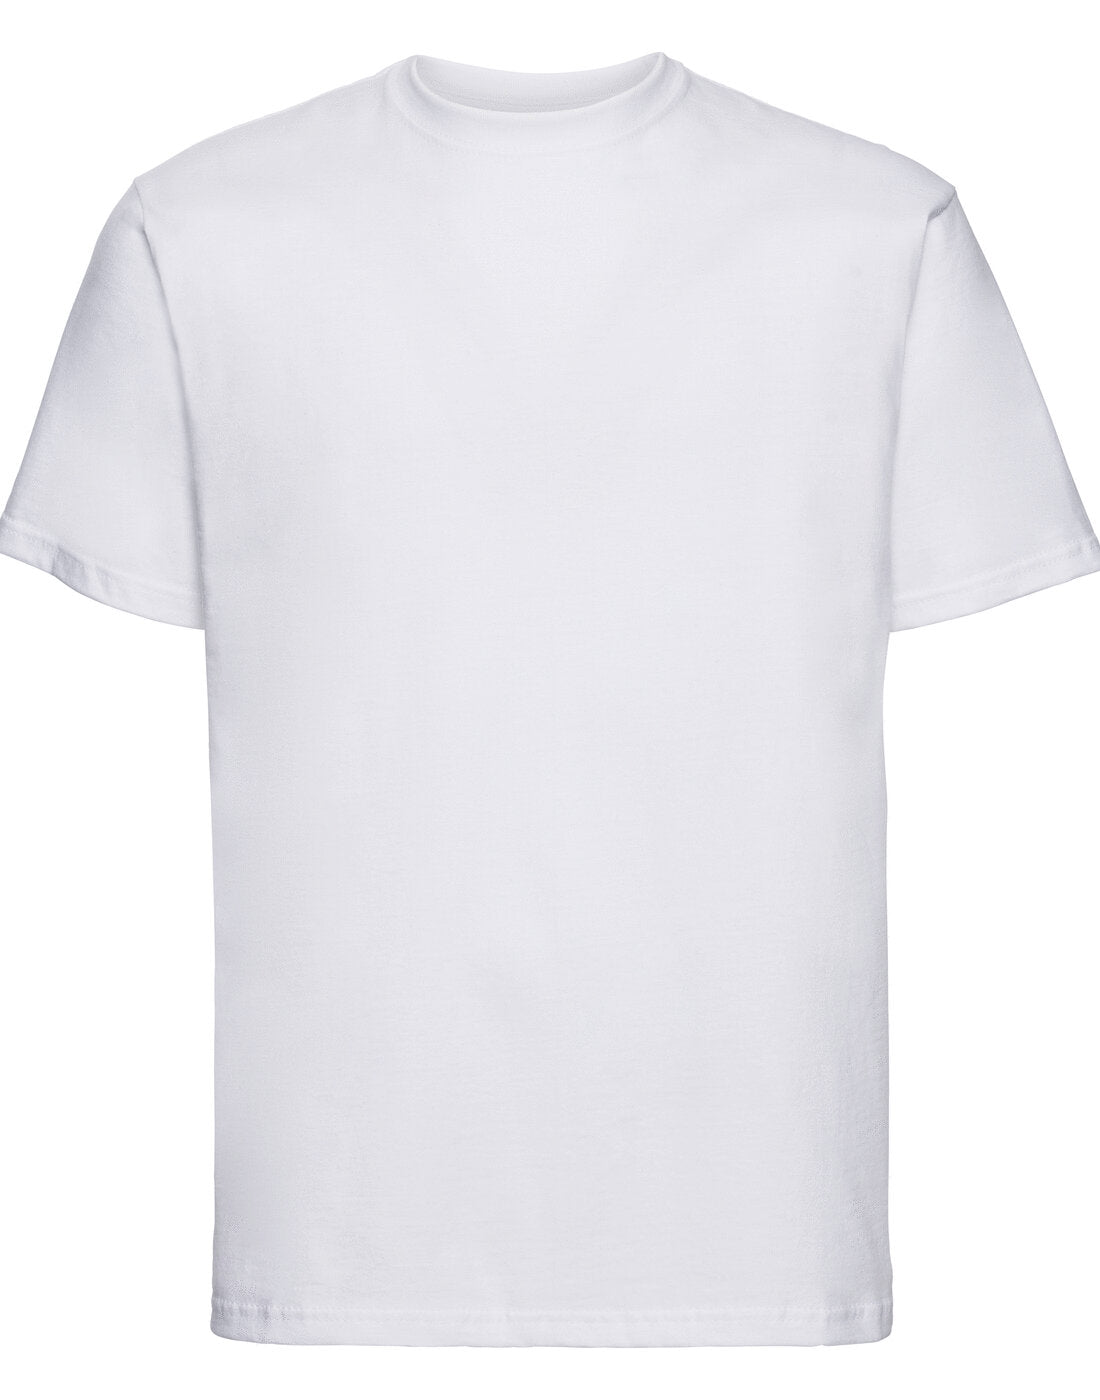 Russell Classic Unisex T-Shirt - White